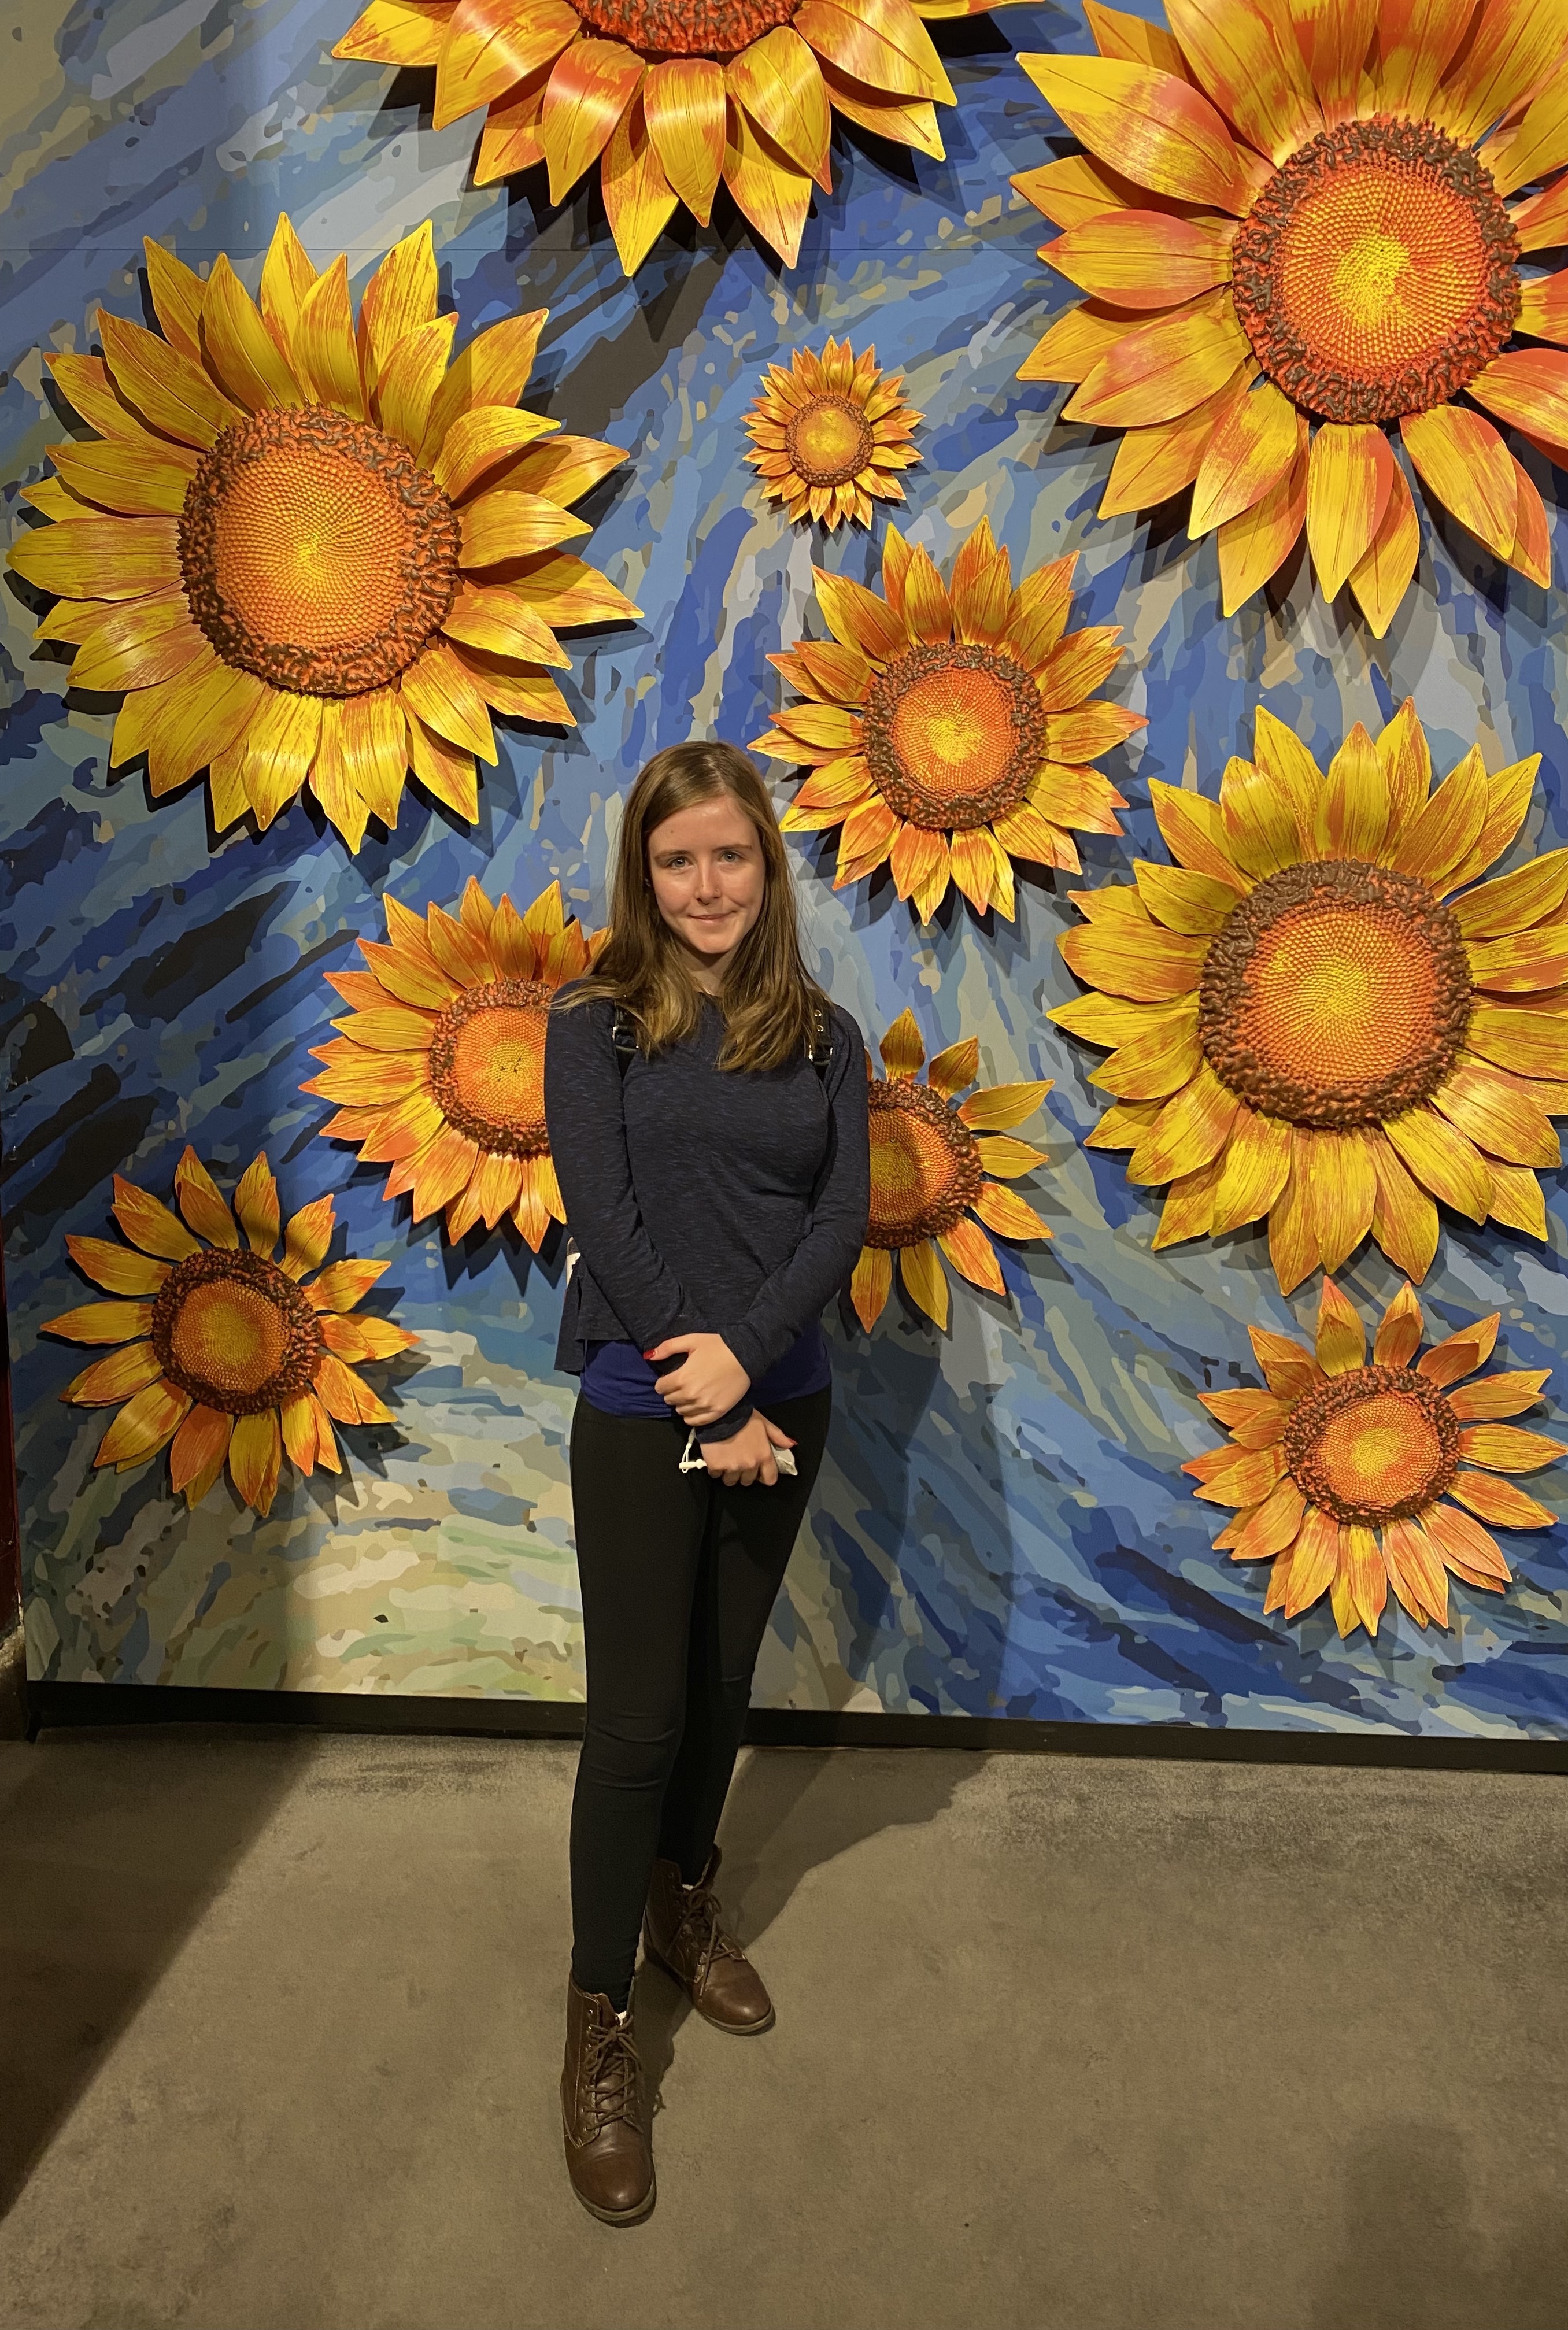 A picture of me: a girl with dark brown hair in a blue sweater, black leggings and short brown boots standing in front of a wall with 3D yellow sunflowers on a blue swirling background